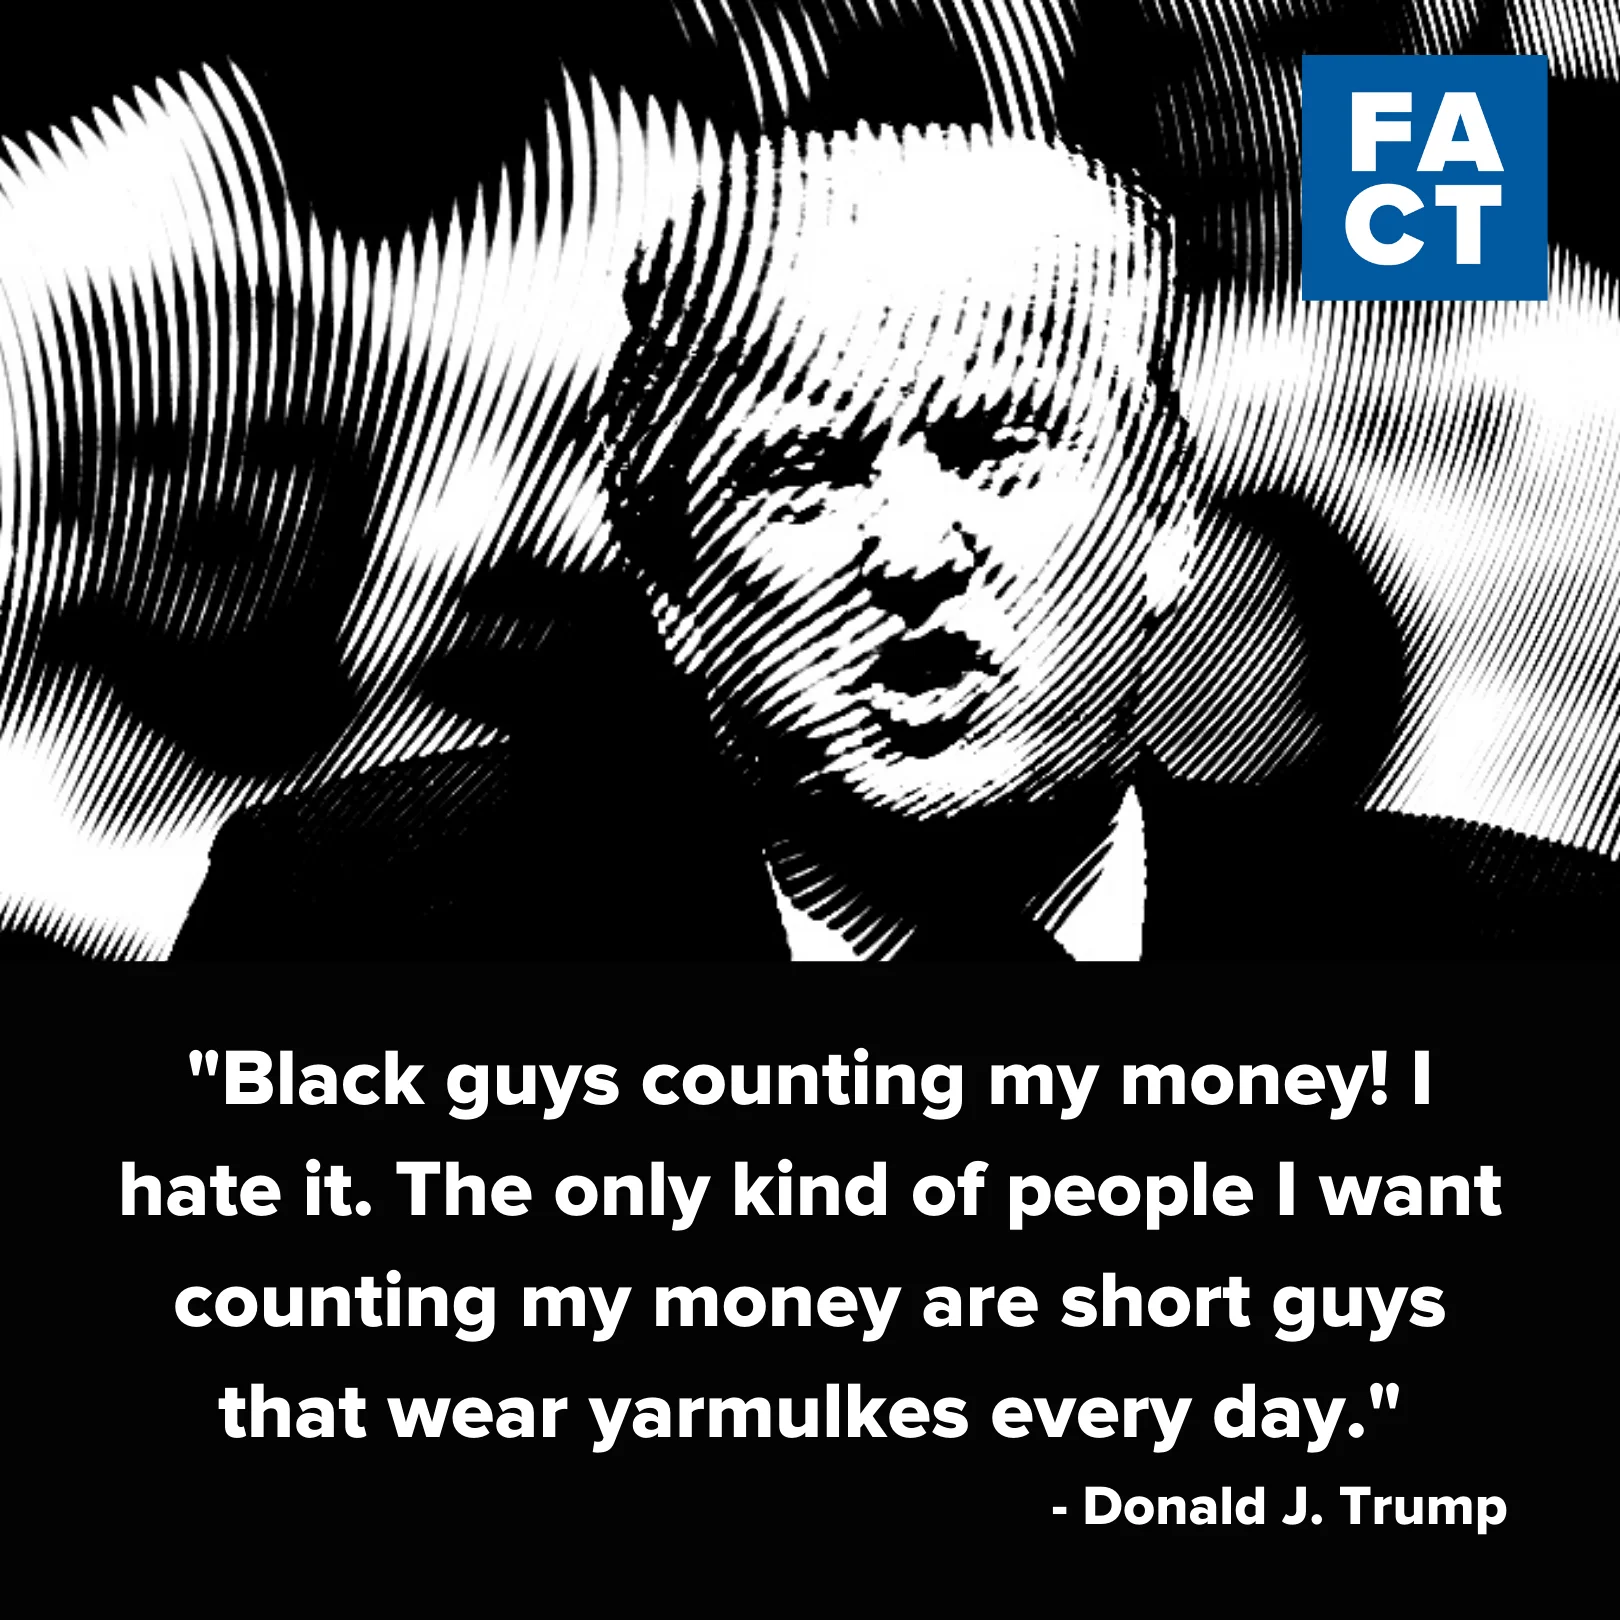 Black guys counting my money! I hate it. Says Donald Trump.